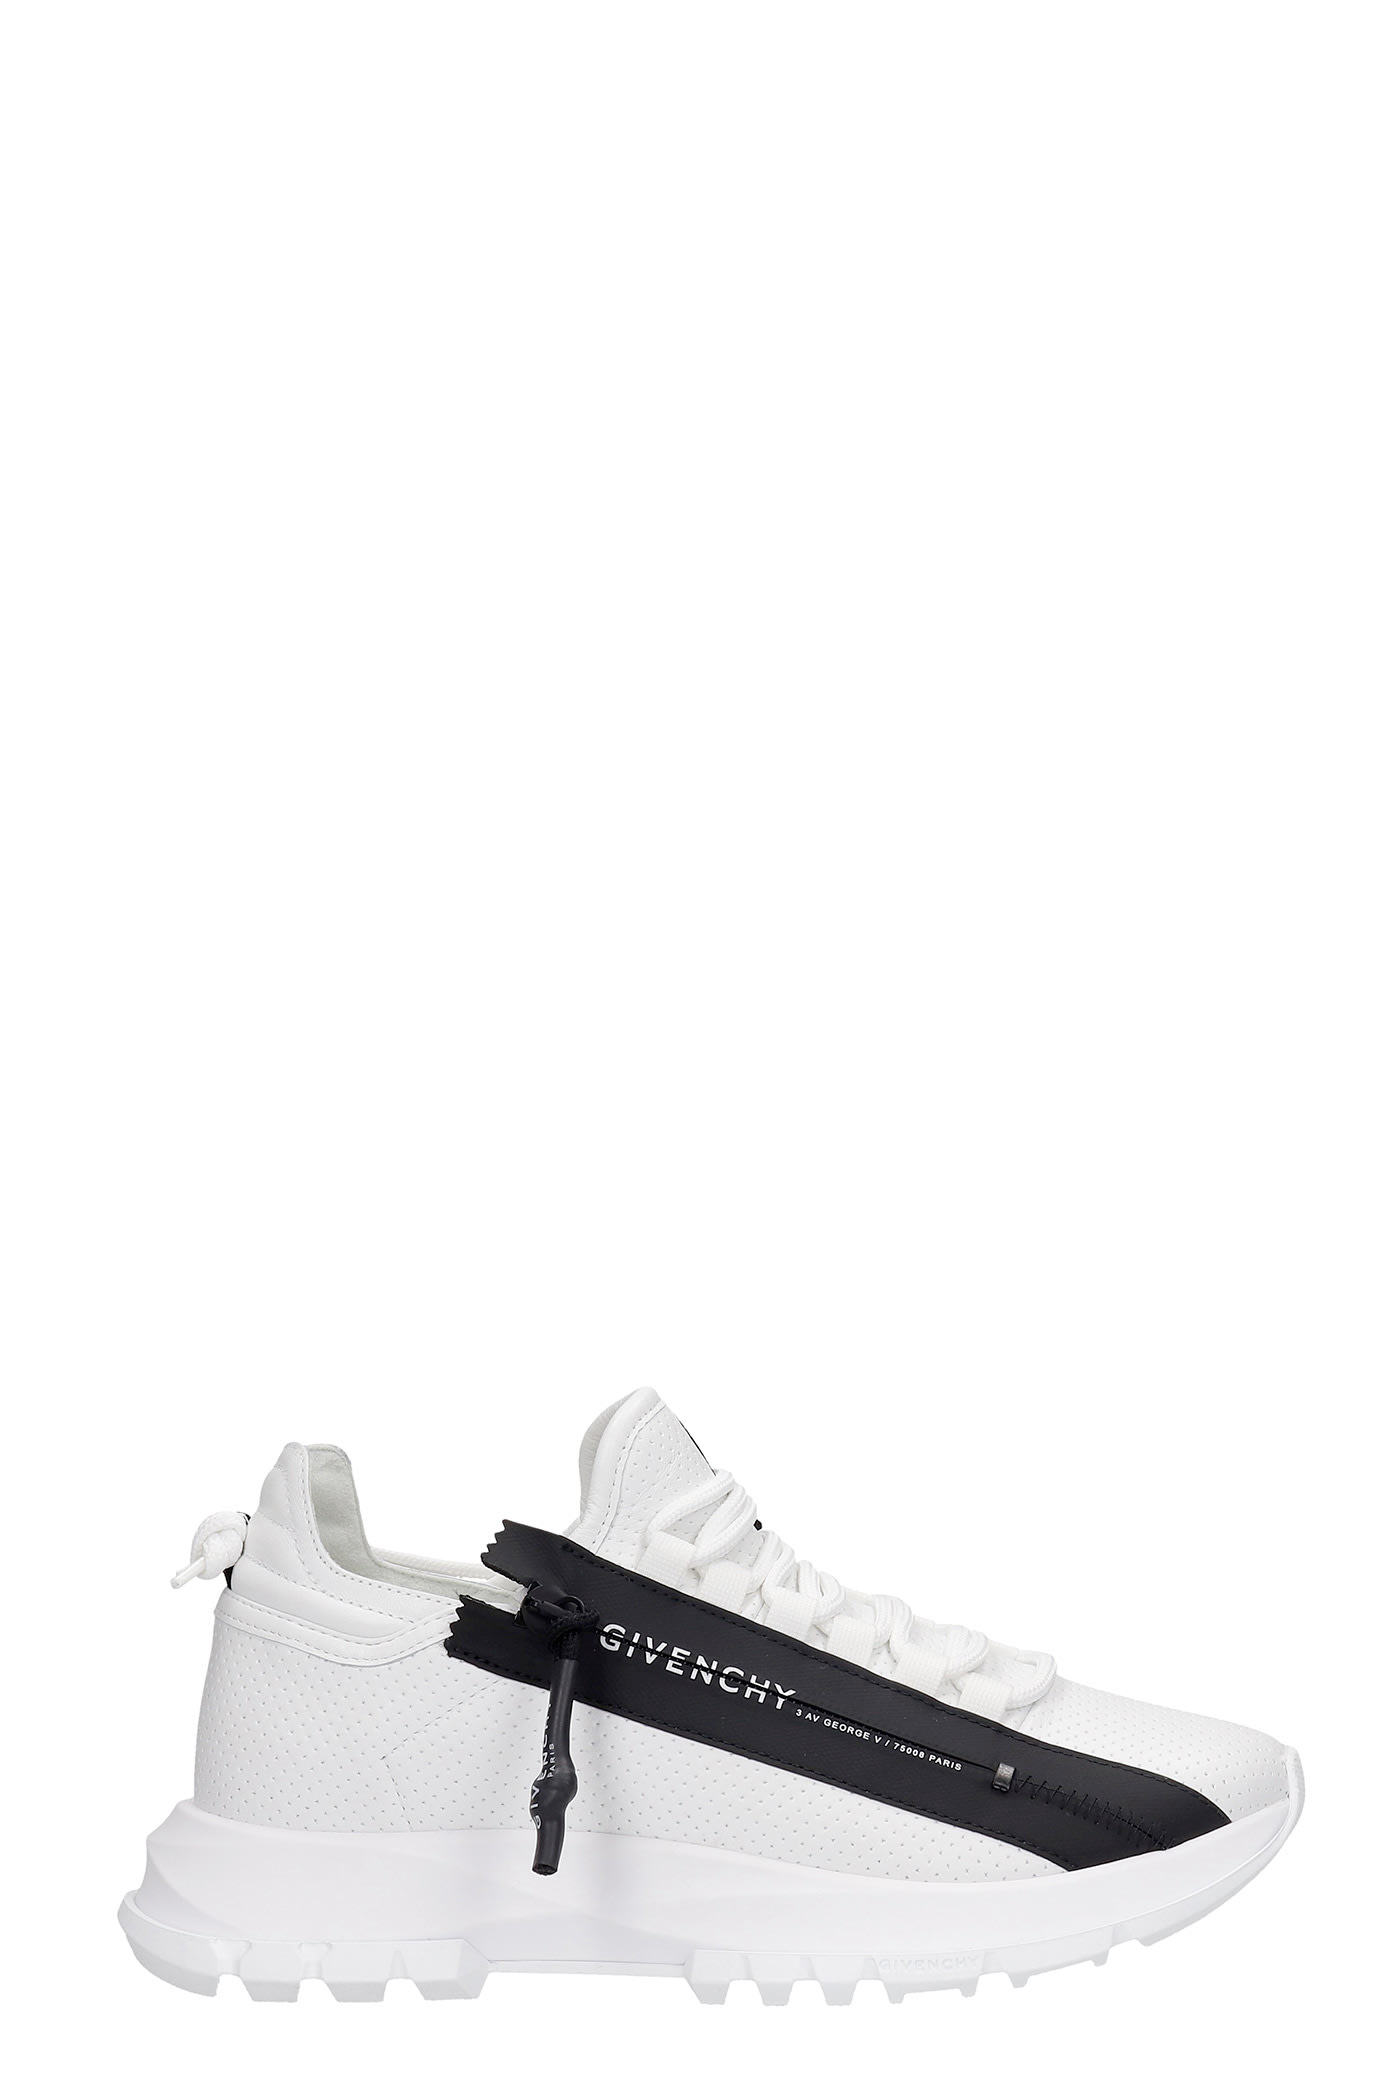 GIVENCHY SPECTRE SNEAKERS IN WHITE LEATHER,BE0019E0SV116